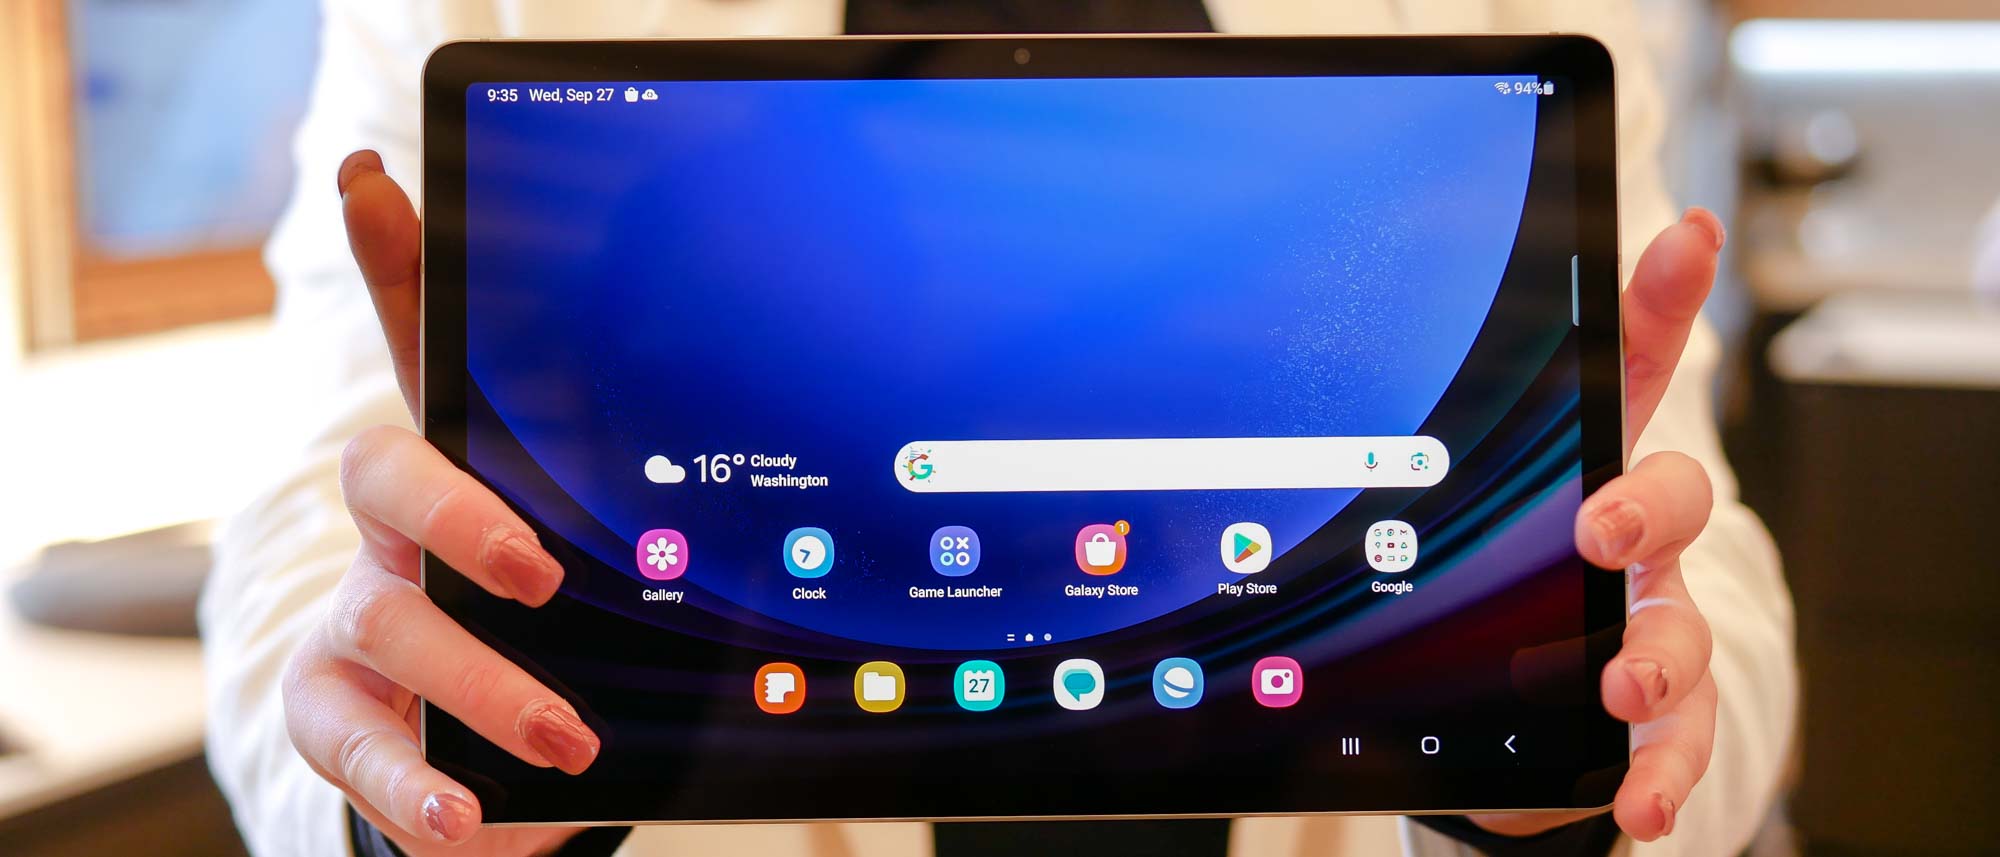 Samsung Galaxy Tab S9 (128GB) Tablet Review - Consumer Reports